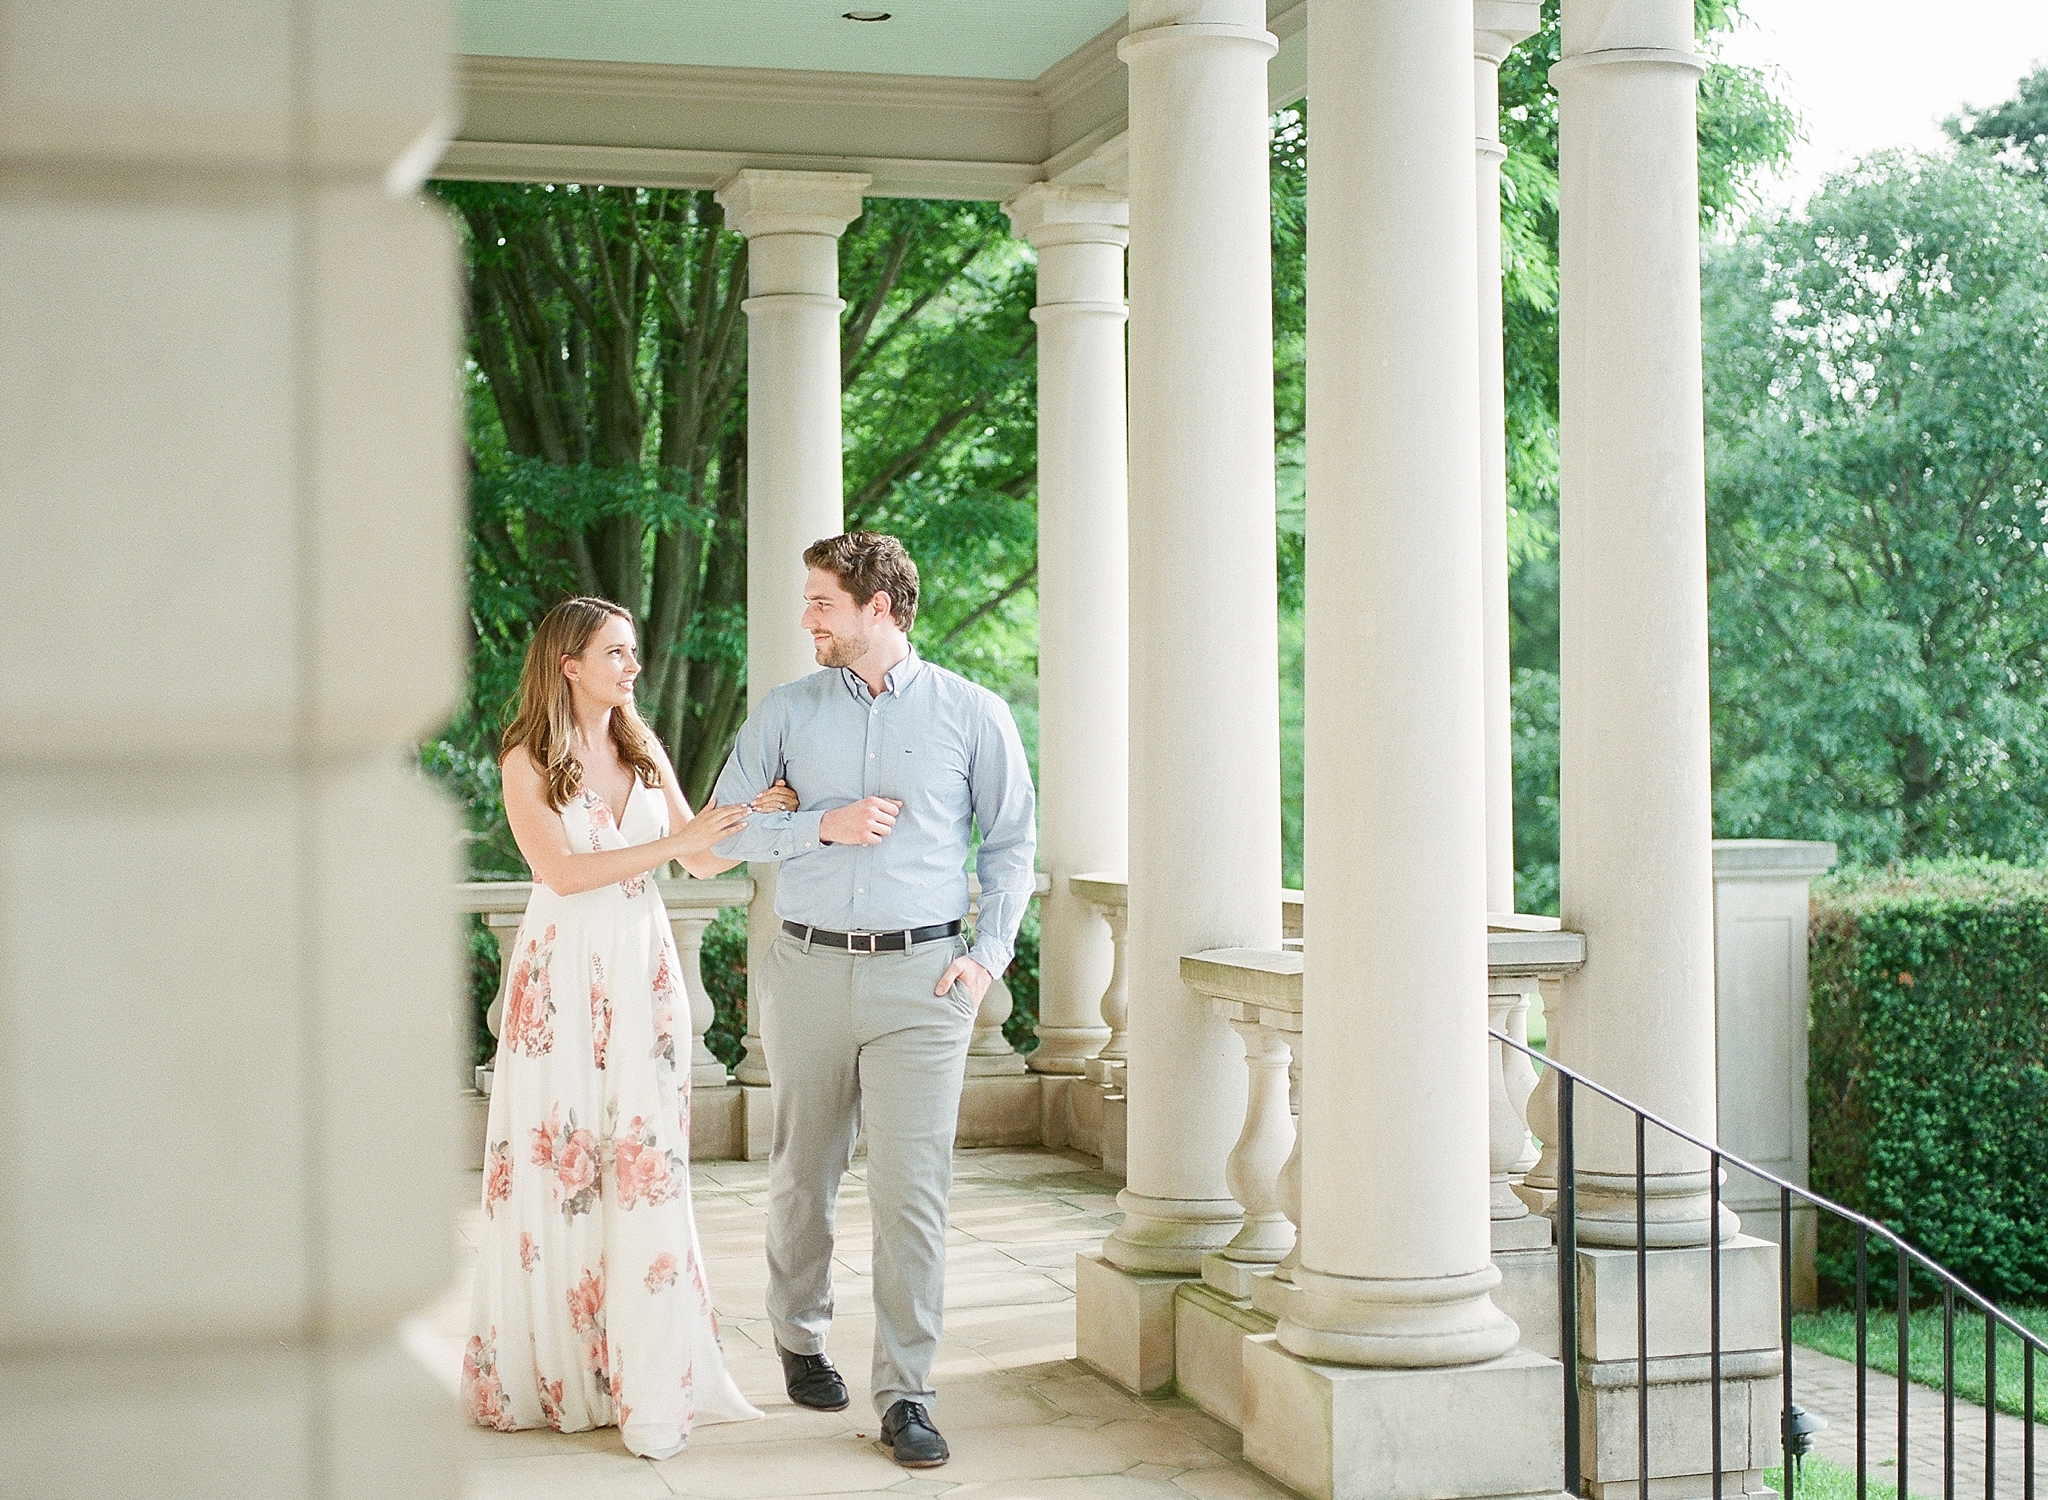 This sweet summer engagement session was photographed at Great Marsh Estate in Bealeton, VA by fine art film photographer, Alicia Lacey. 